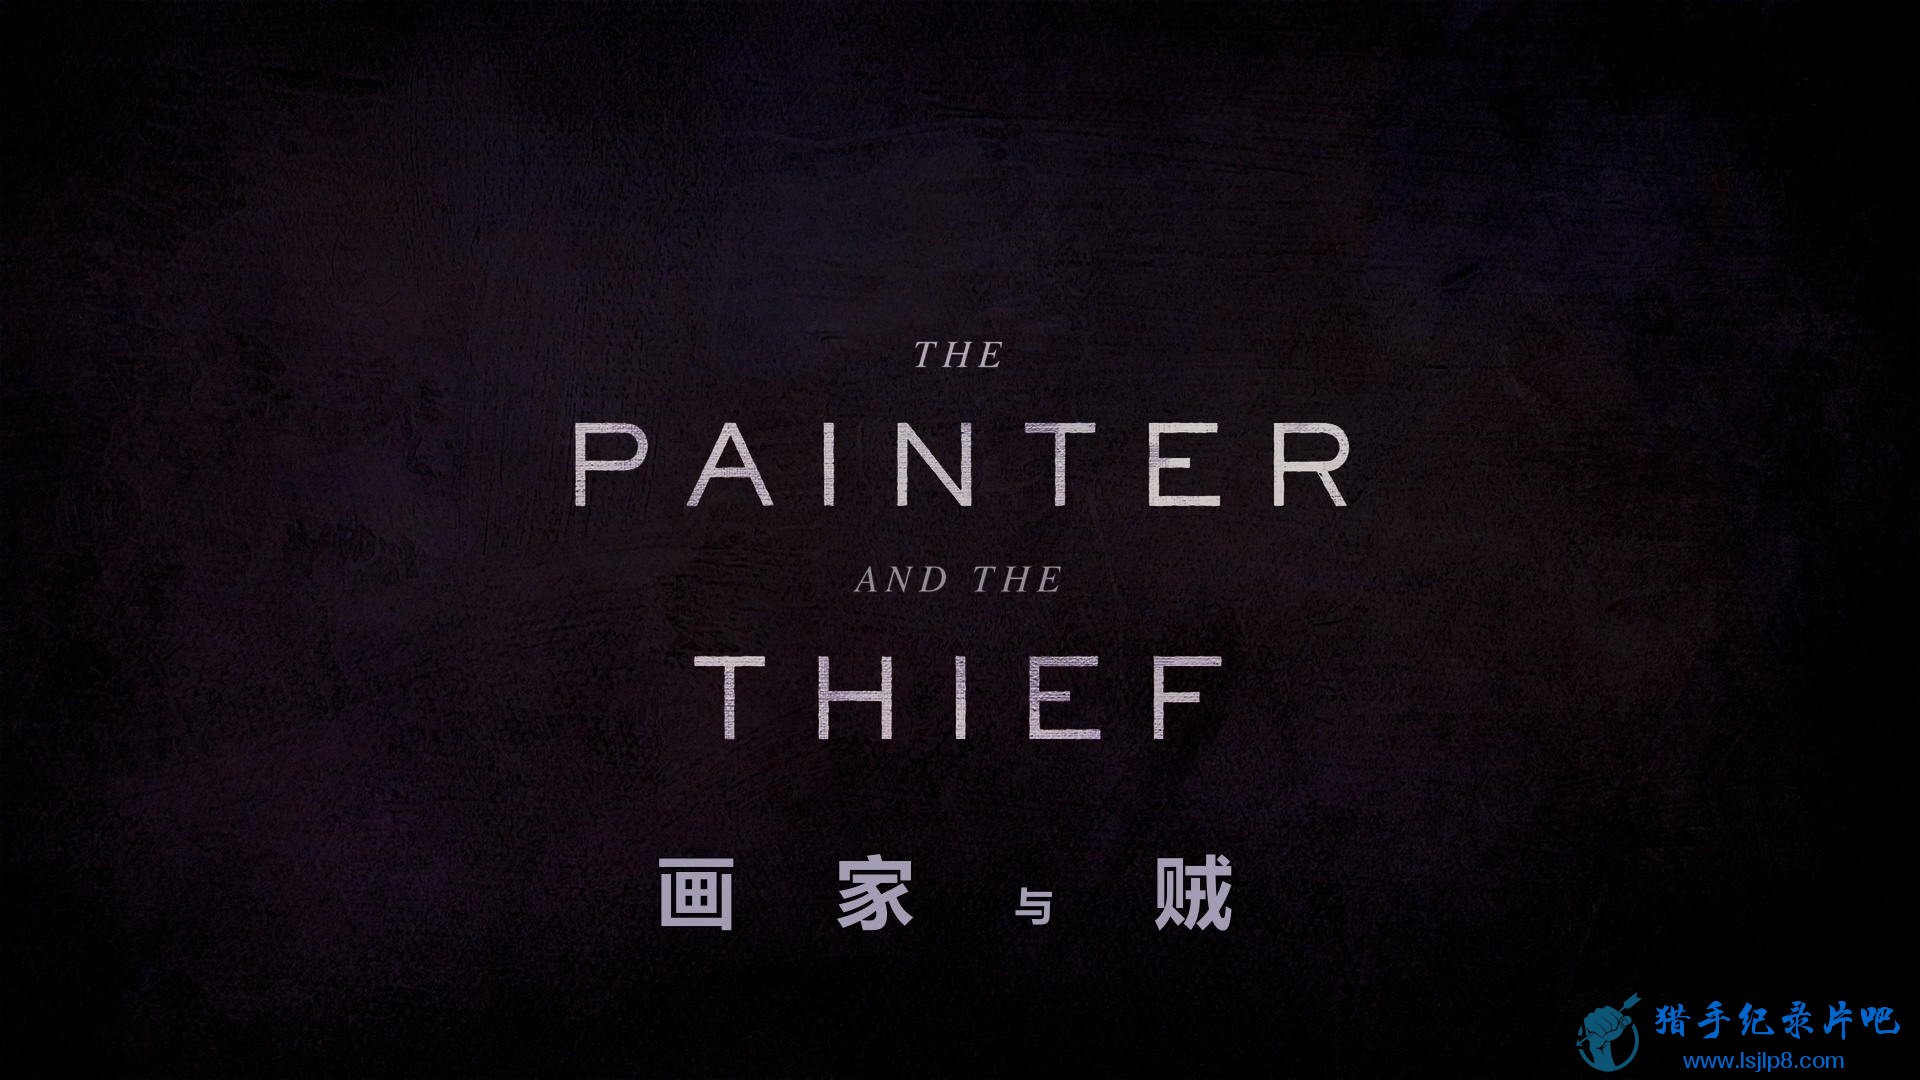 The.Painter.and.the.Thief.2020.jpg